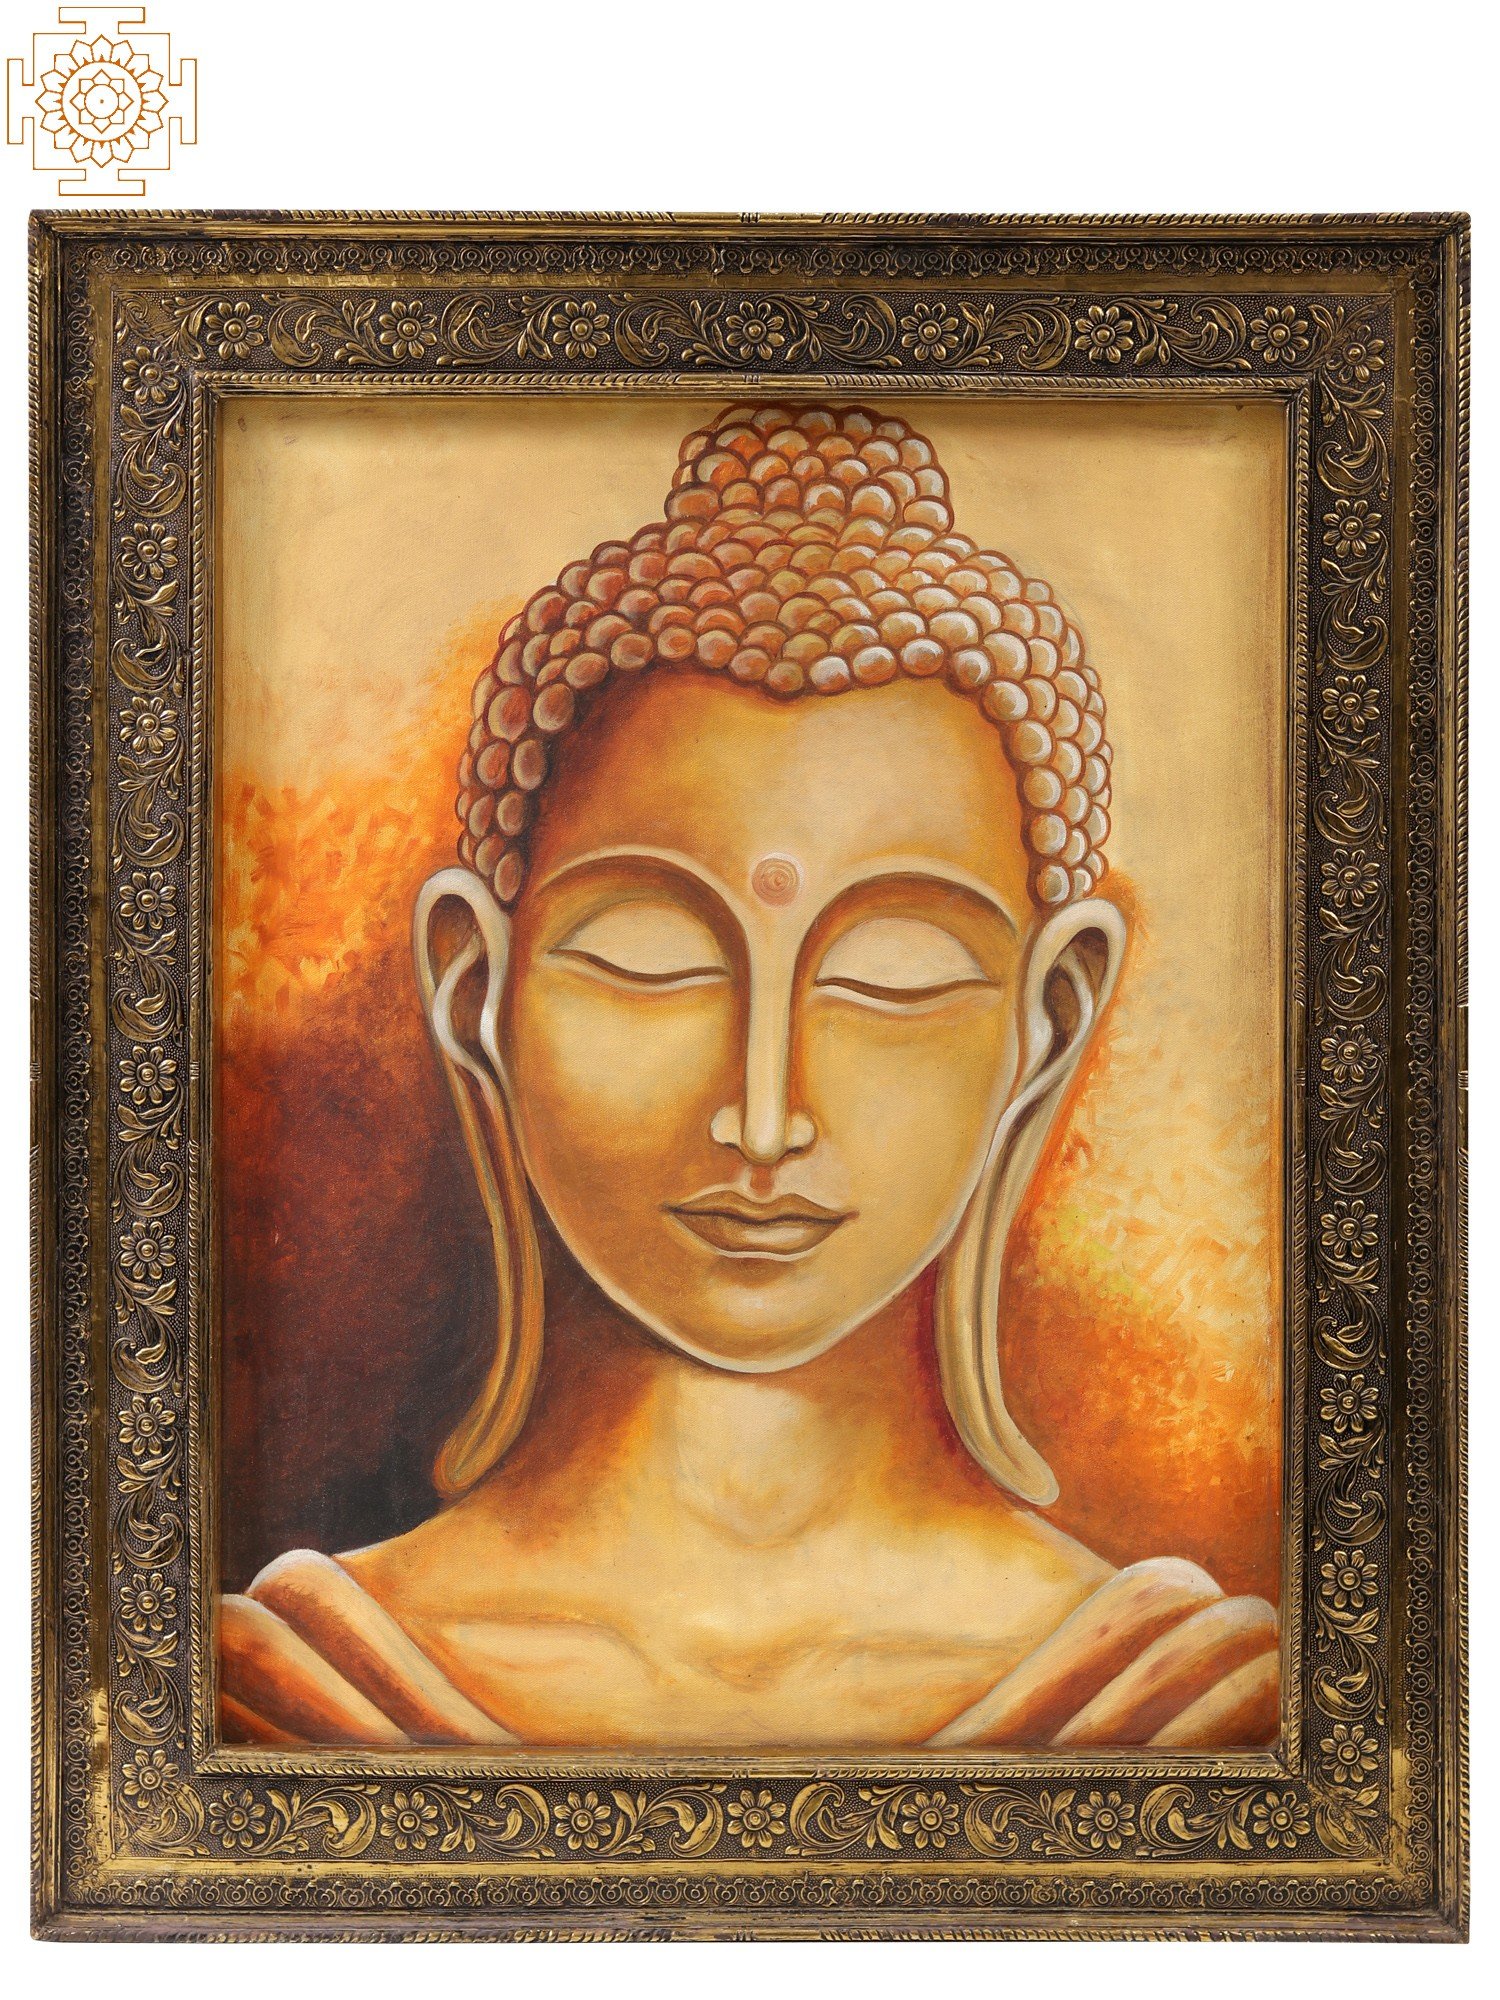 Buy Lord Buddha  Monochrome Texture Art Canvas Art Print by ARTISTIC  AKASH CodePRT799068010  Prints for Sale online in India